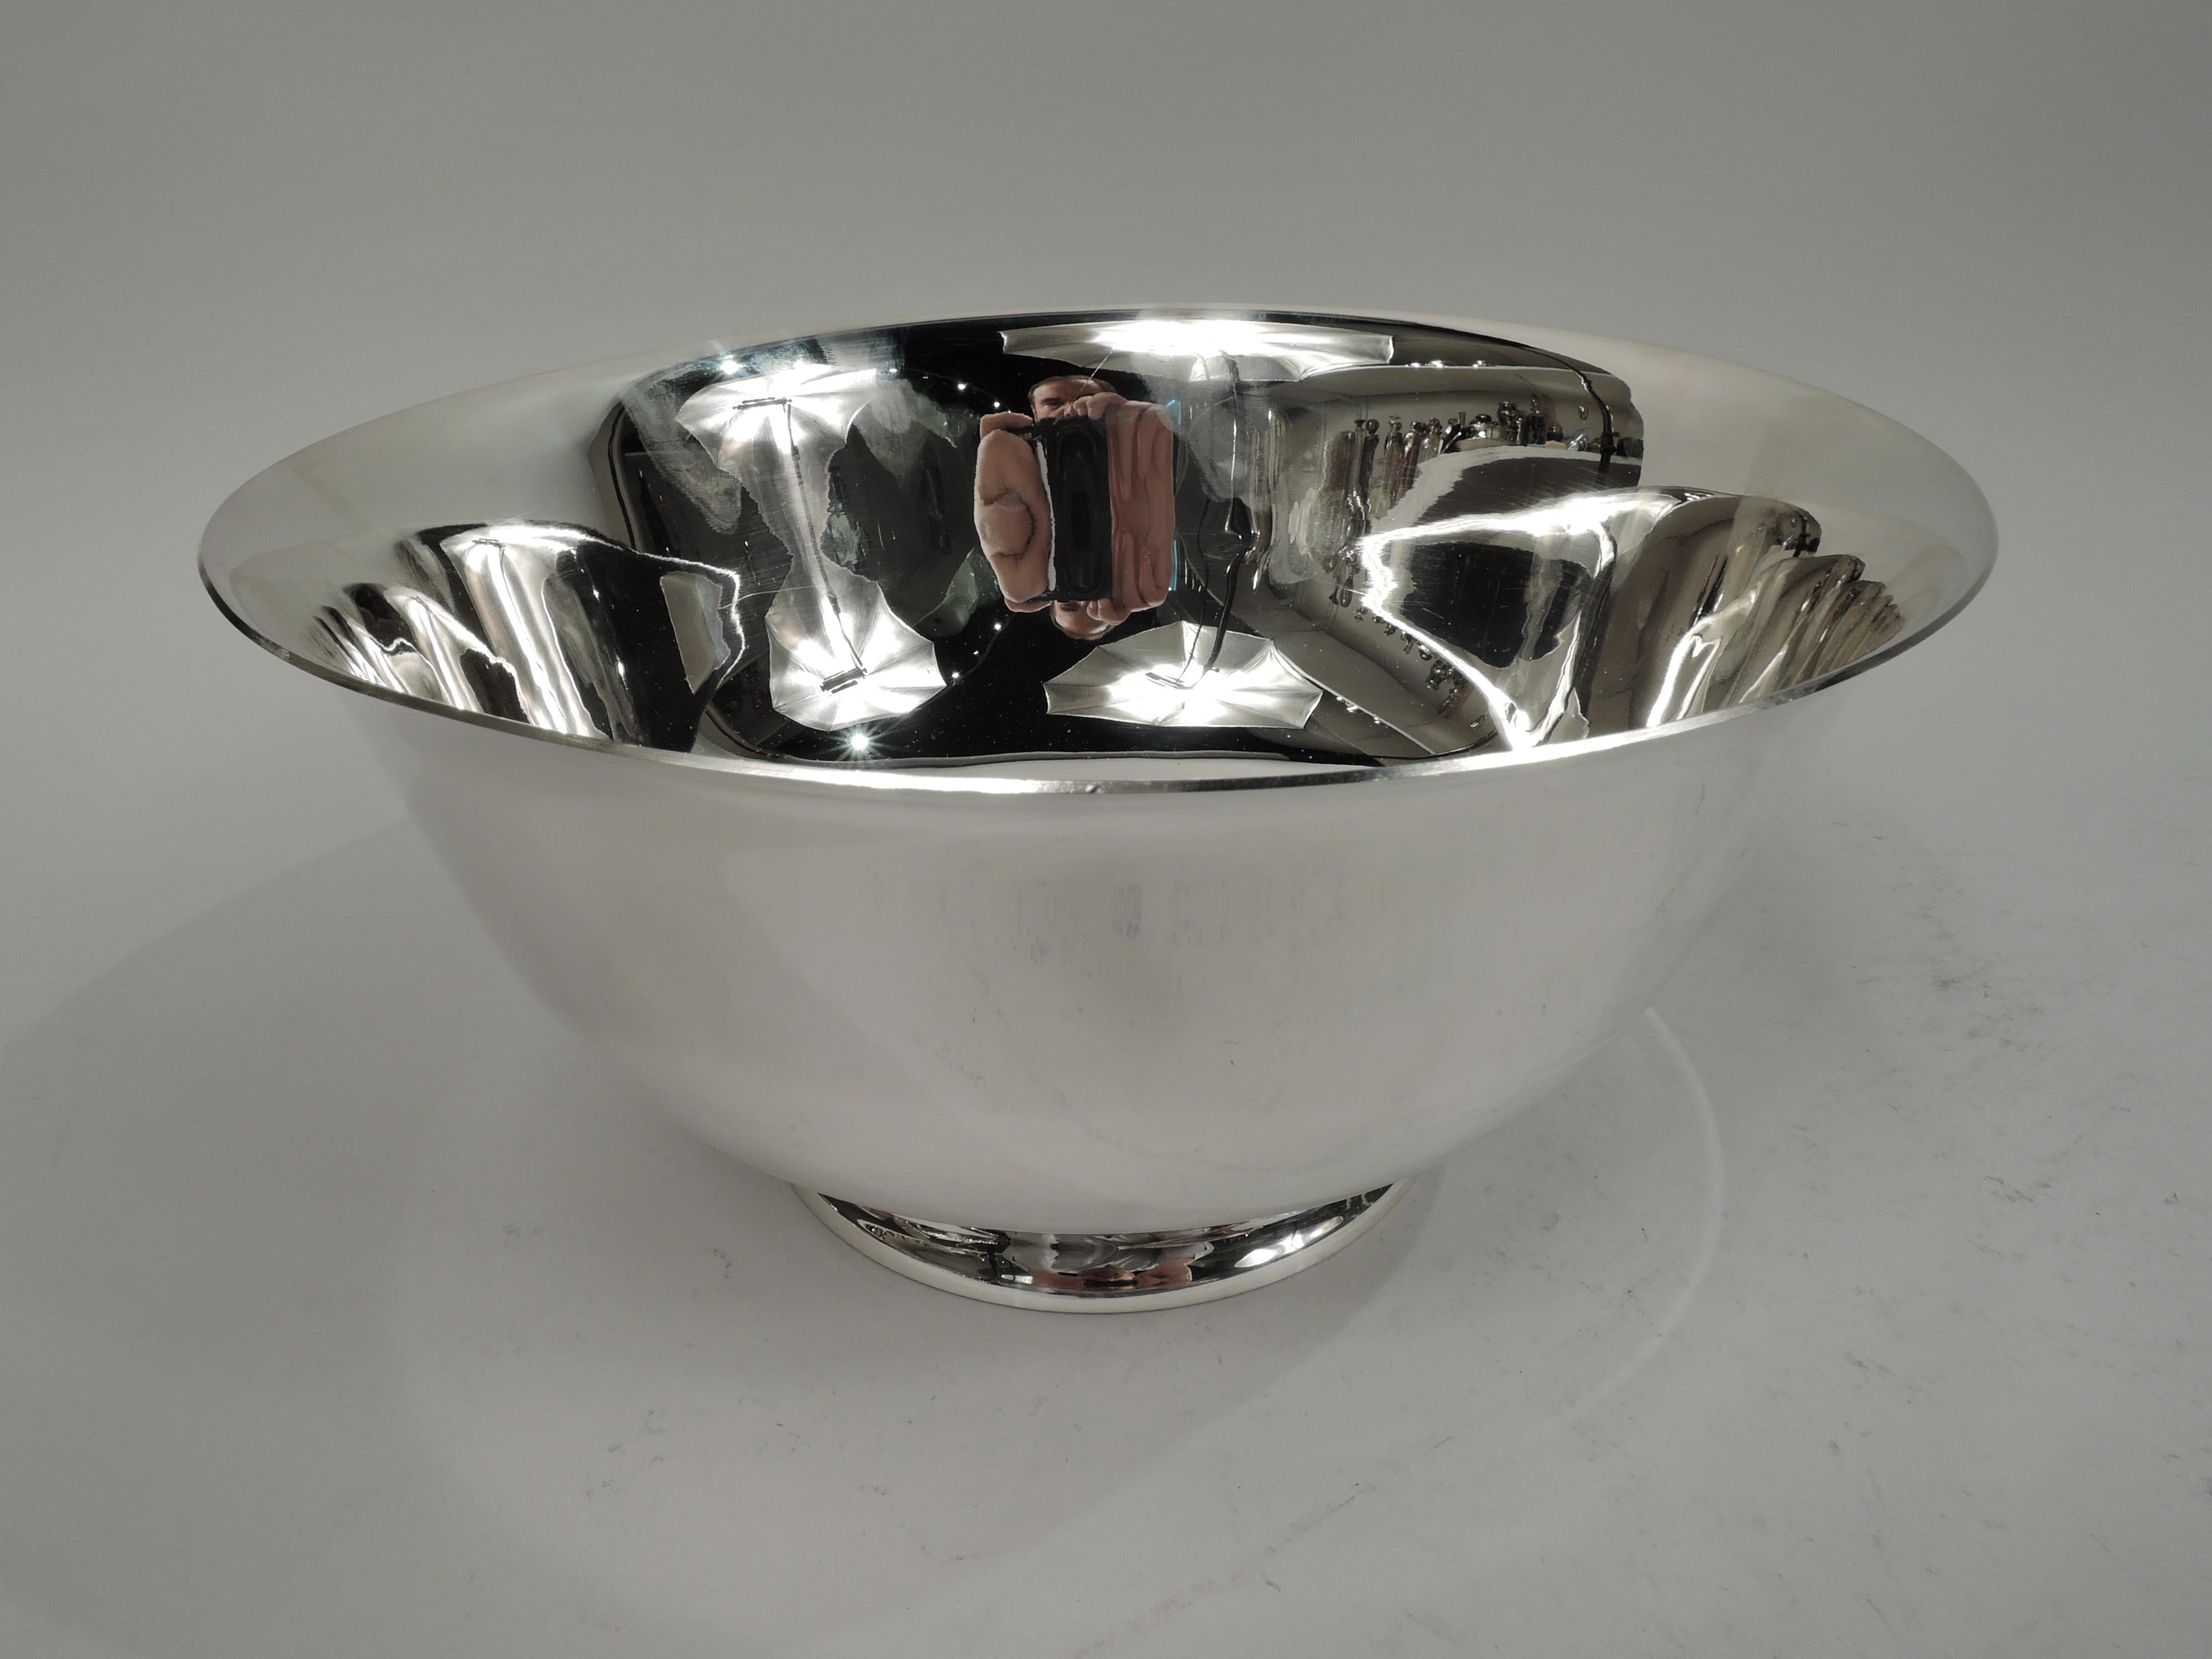 Colonial Revival sterling silver bowl. Made by Dominick & Haff in New York in 1940. Tapering sides, flared rim, curved bottom, and raised and inset foot. Traditional form with plenty of room for engraving. Fully marked including maker’s stamp, no.